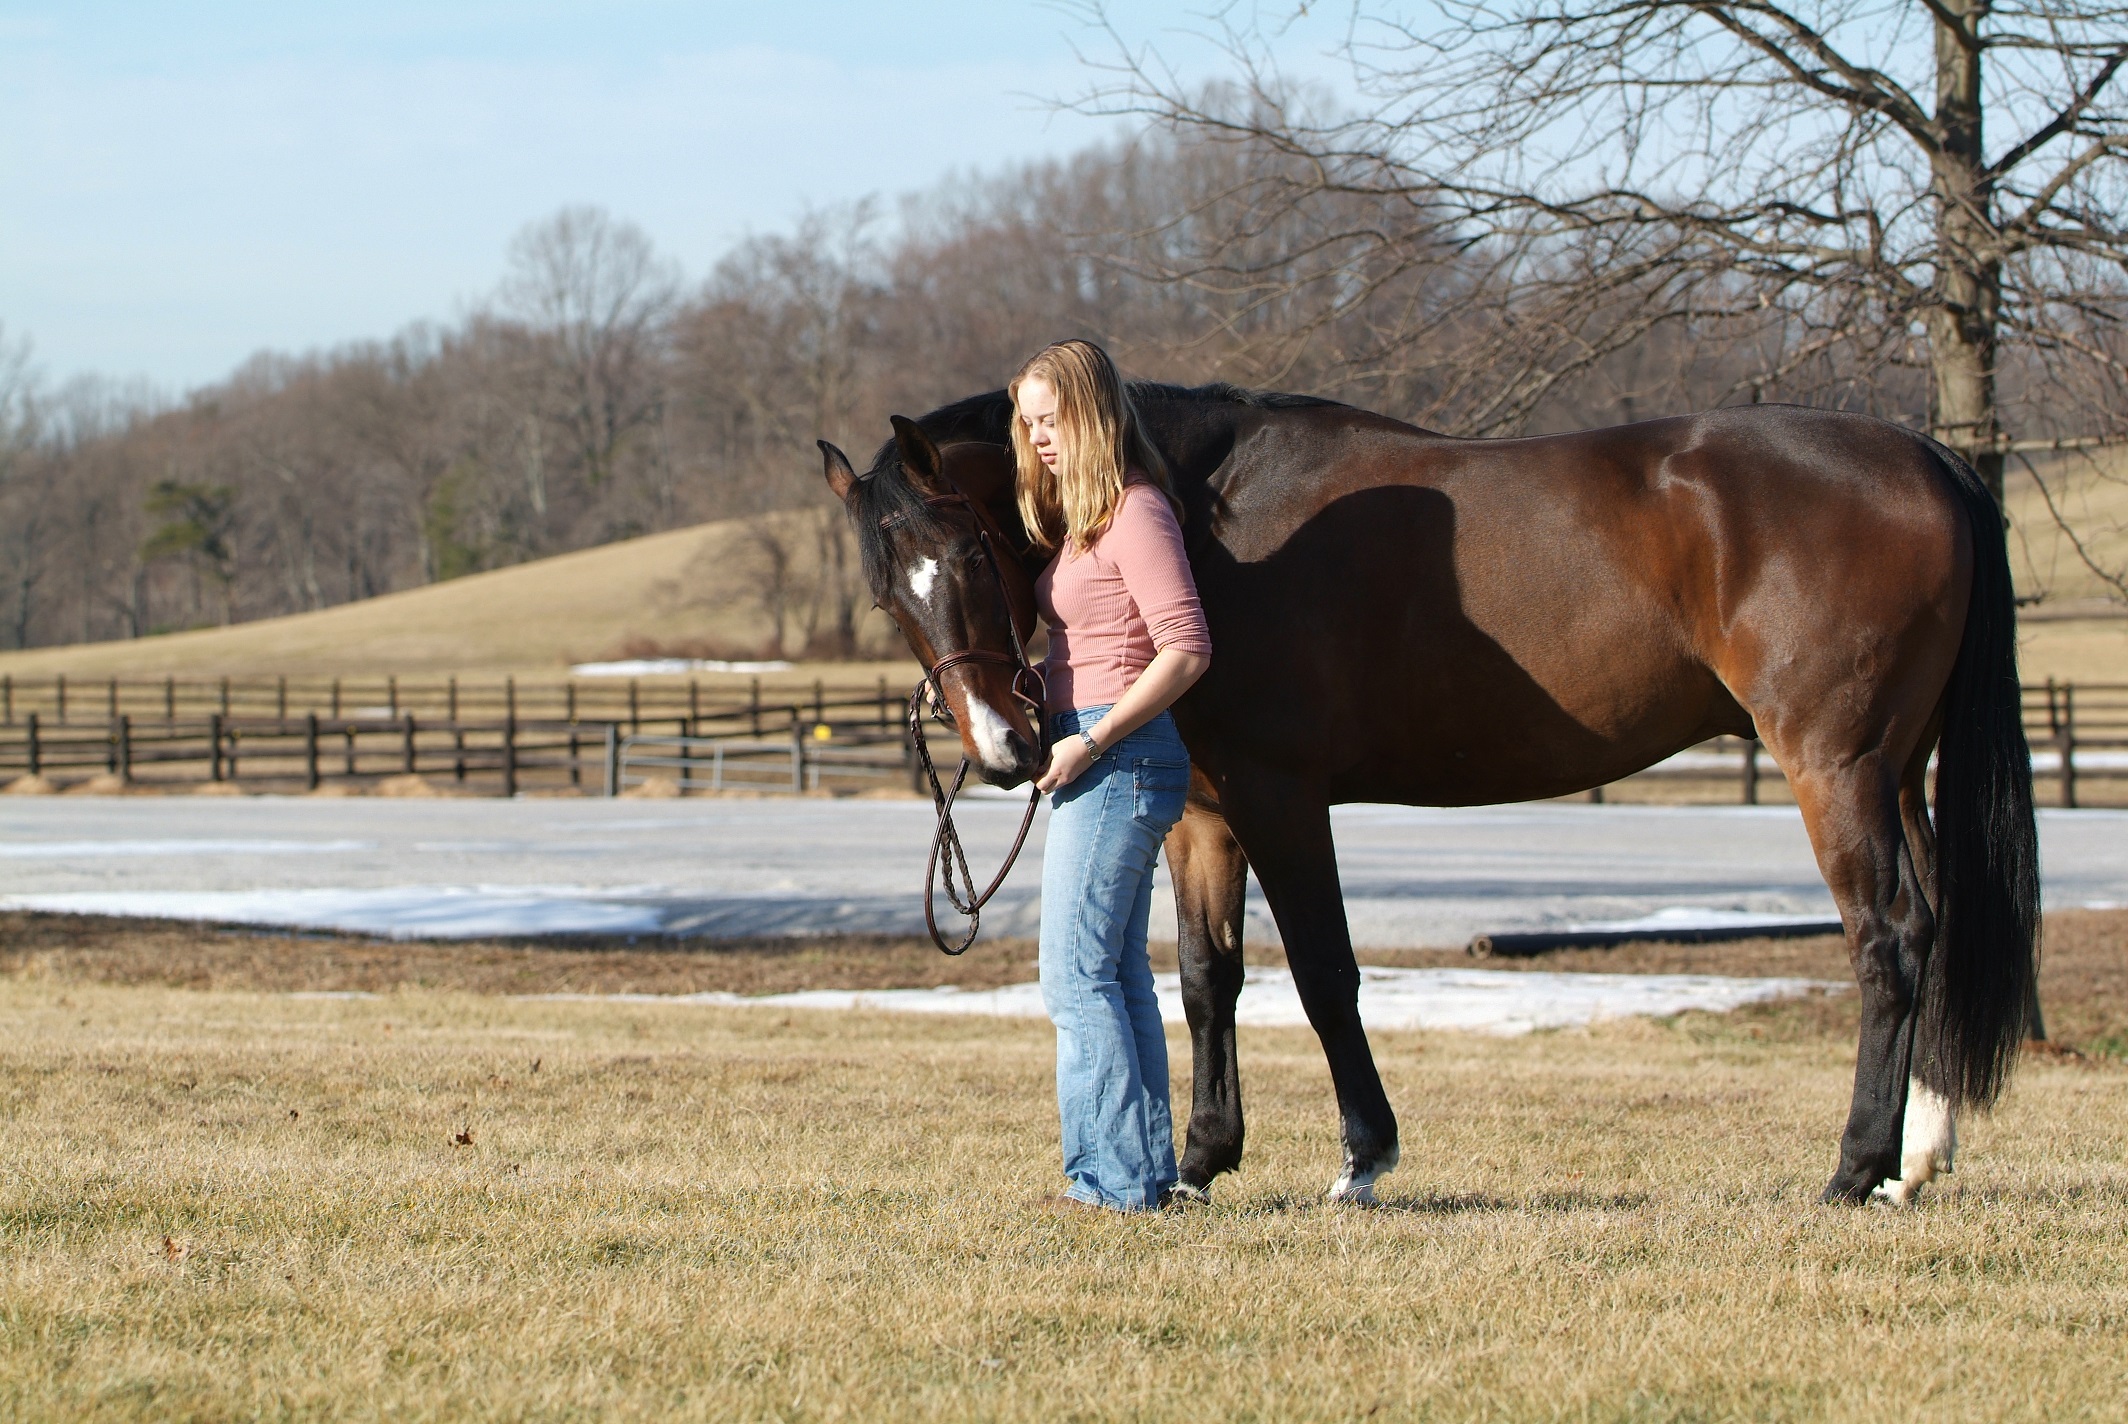 Where people with a passion for horses come together - Maryland Equestrian Farms.